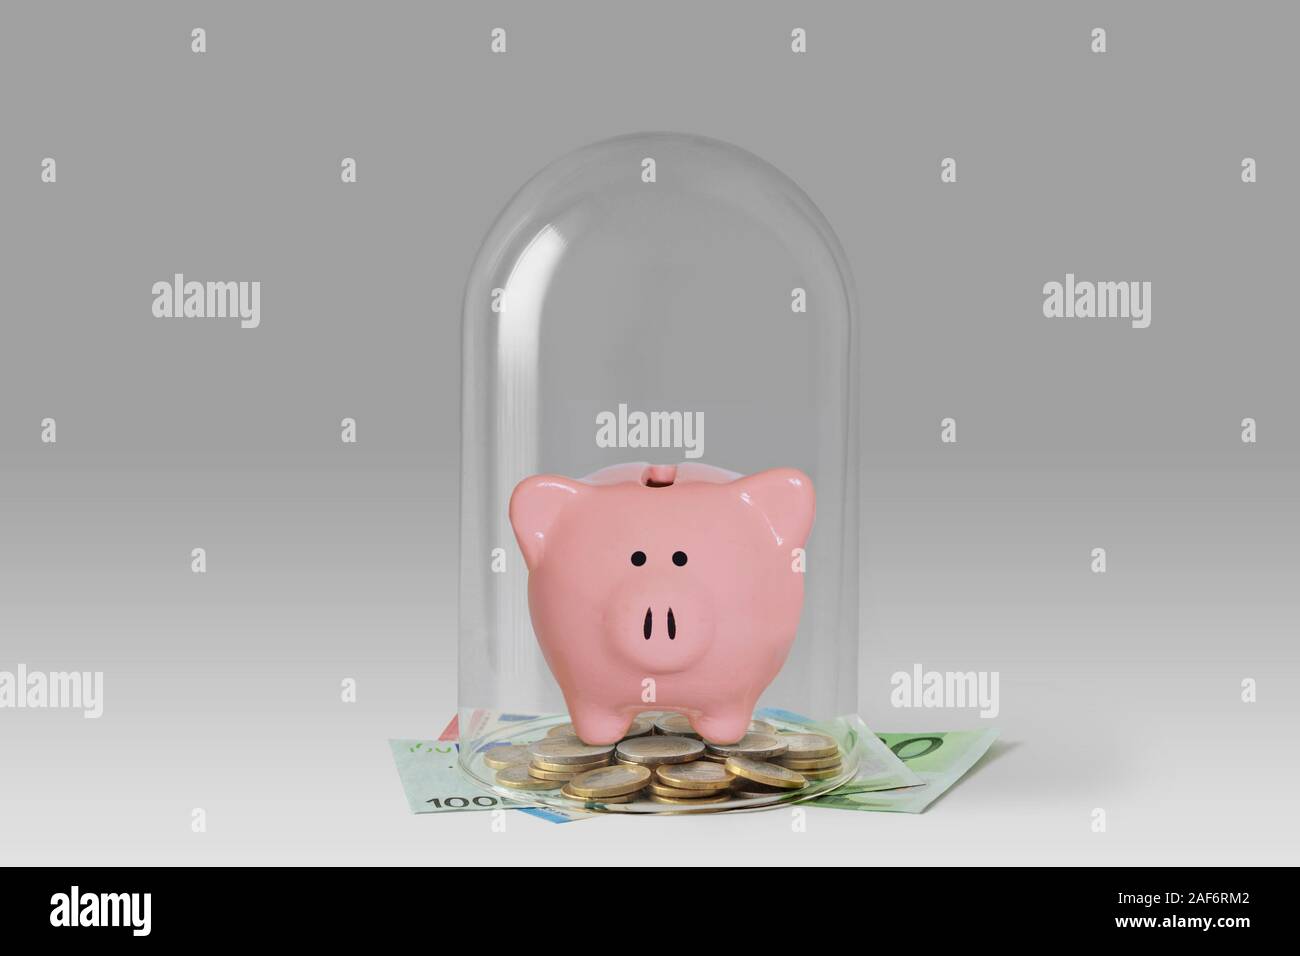 Piggy bank and money under glass bell - Concept of money protection and financial security Stock Photo